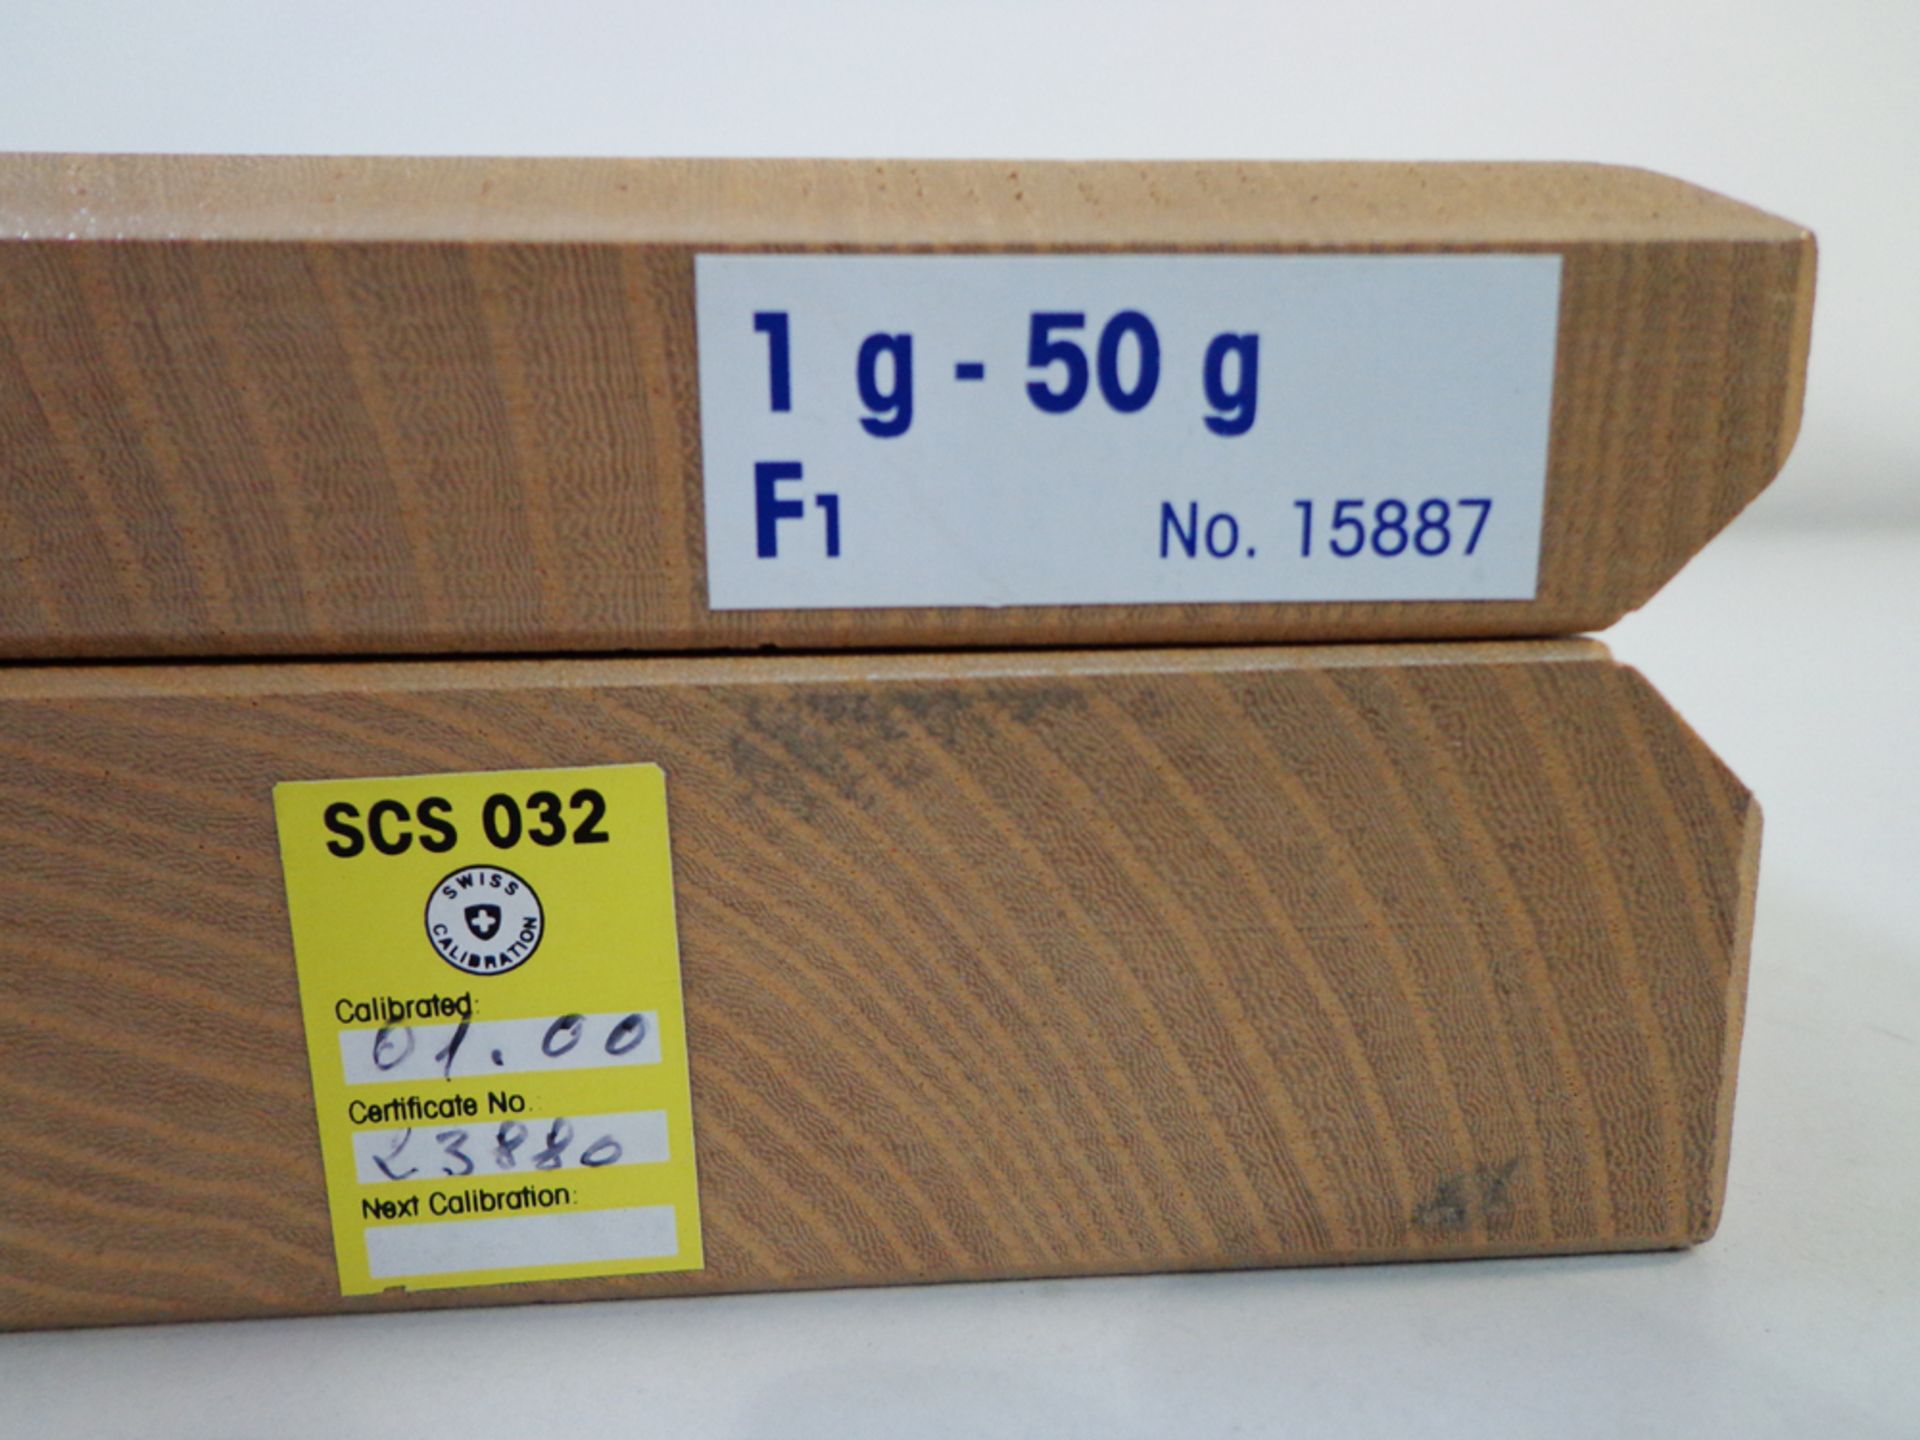 Mettler Toledo 1g to 50g F1 Stainless Steel Calibration Weight Set in Wooden Box, Ref 15887 - Image 5 of 6